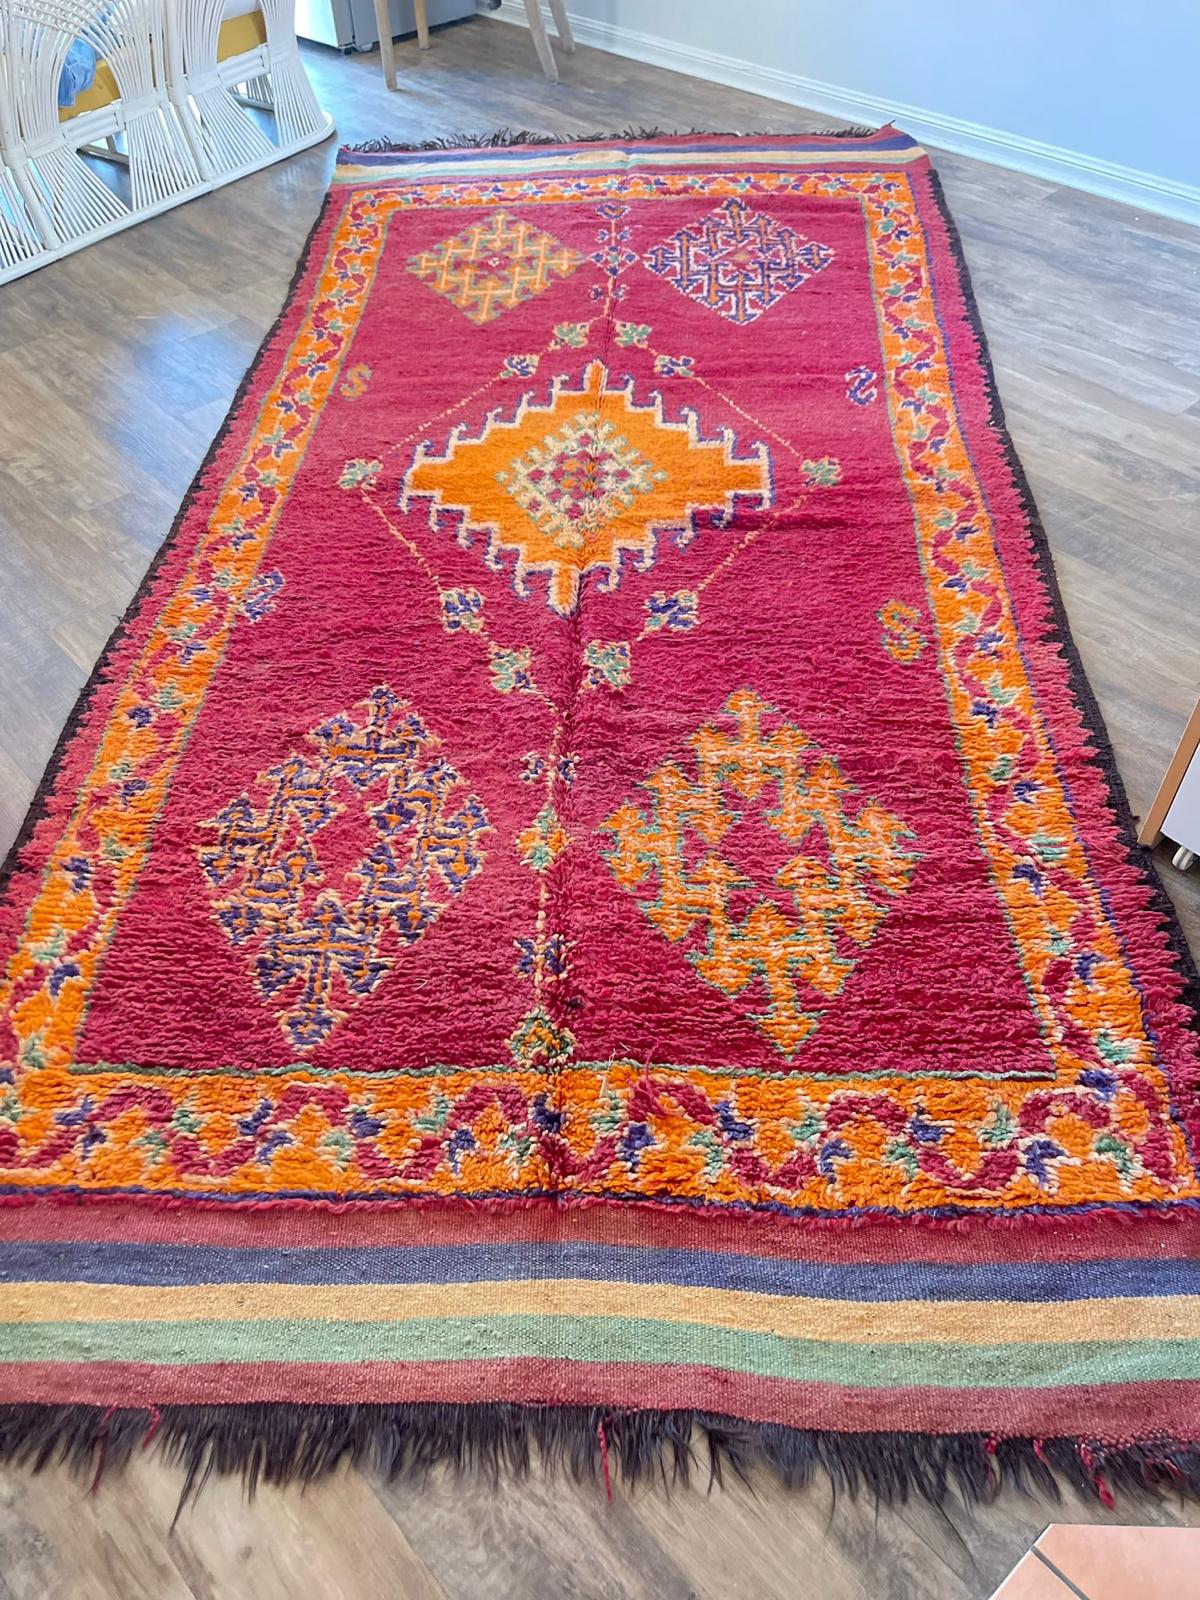 Vibrant red Moroccan Vintage rug with orange and blue/purple accents and symbols